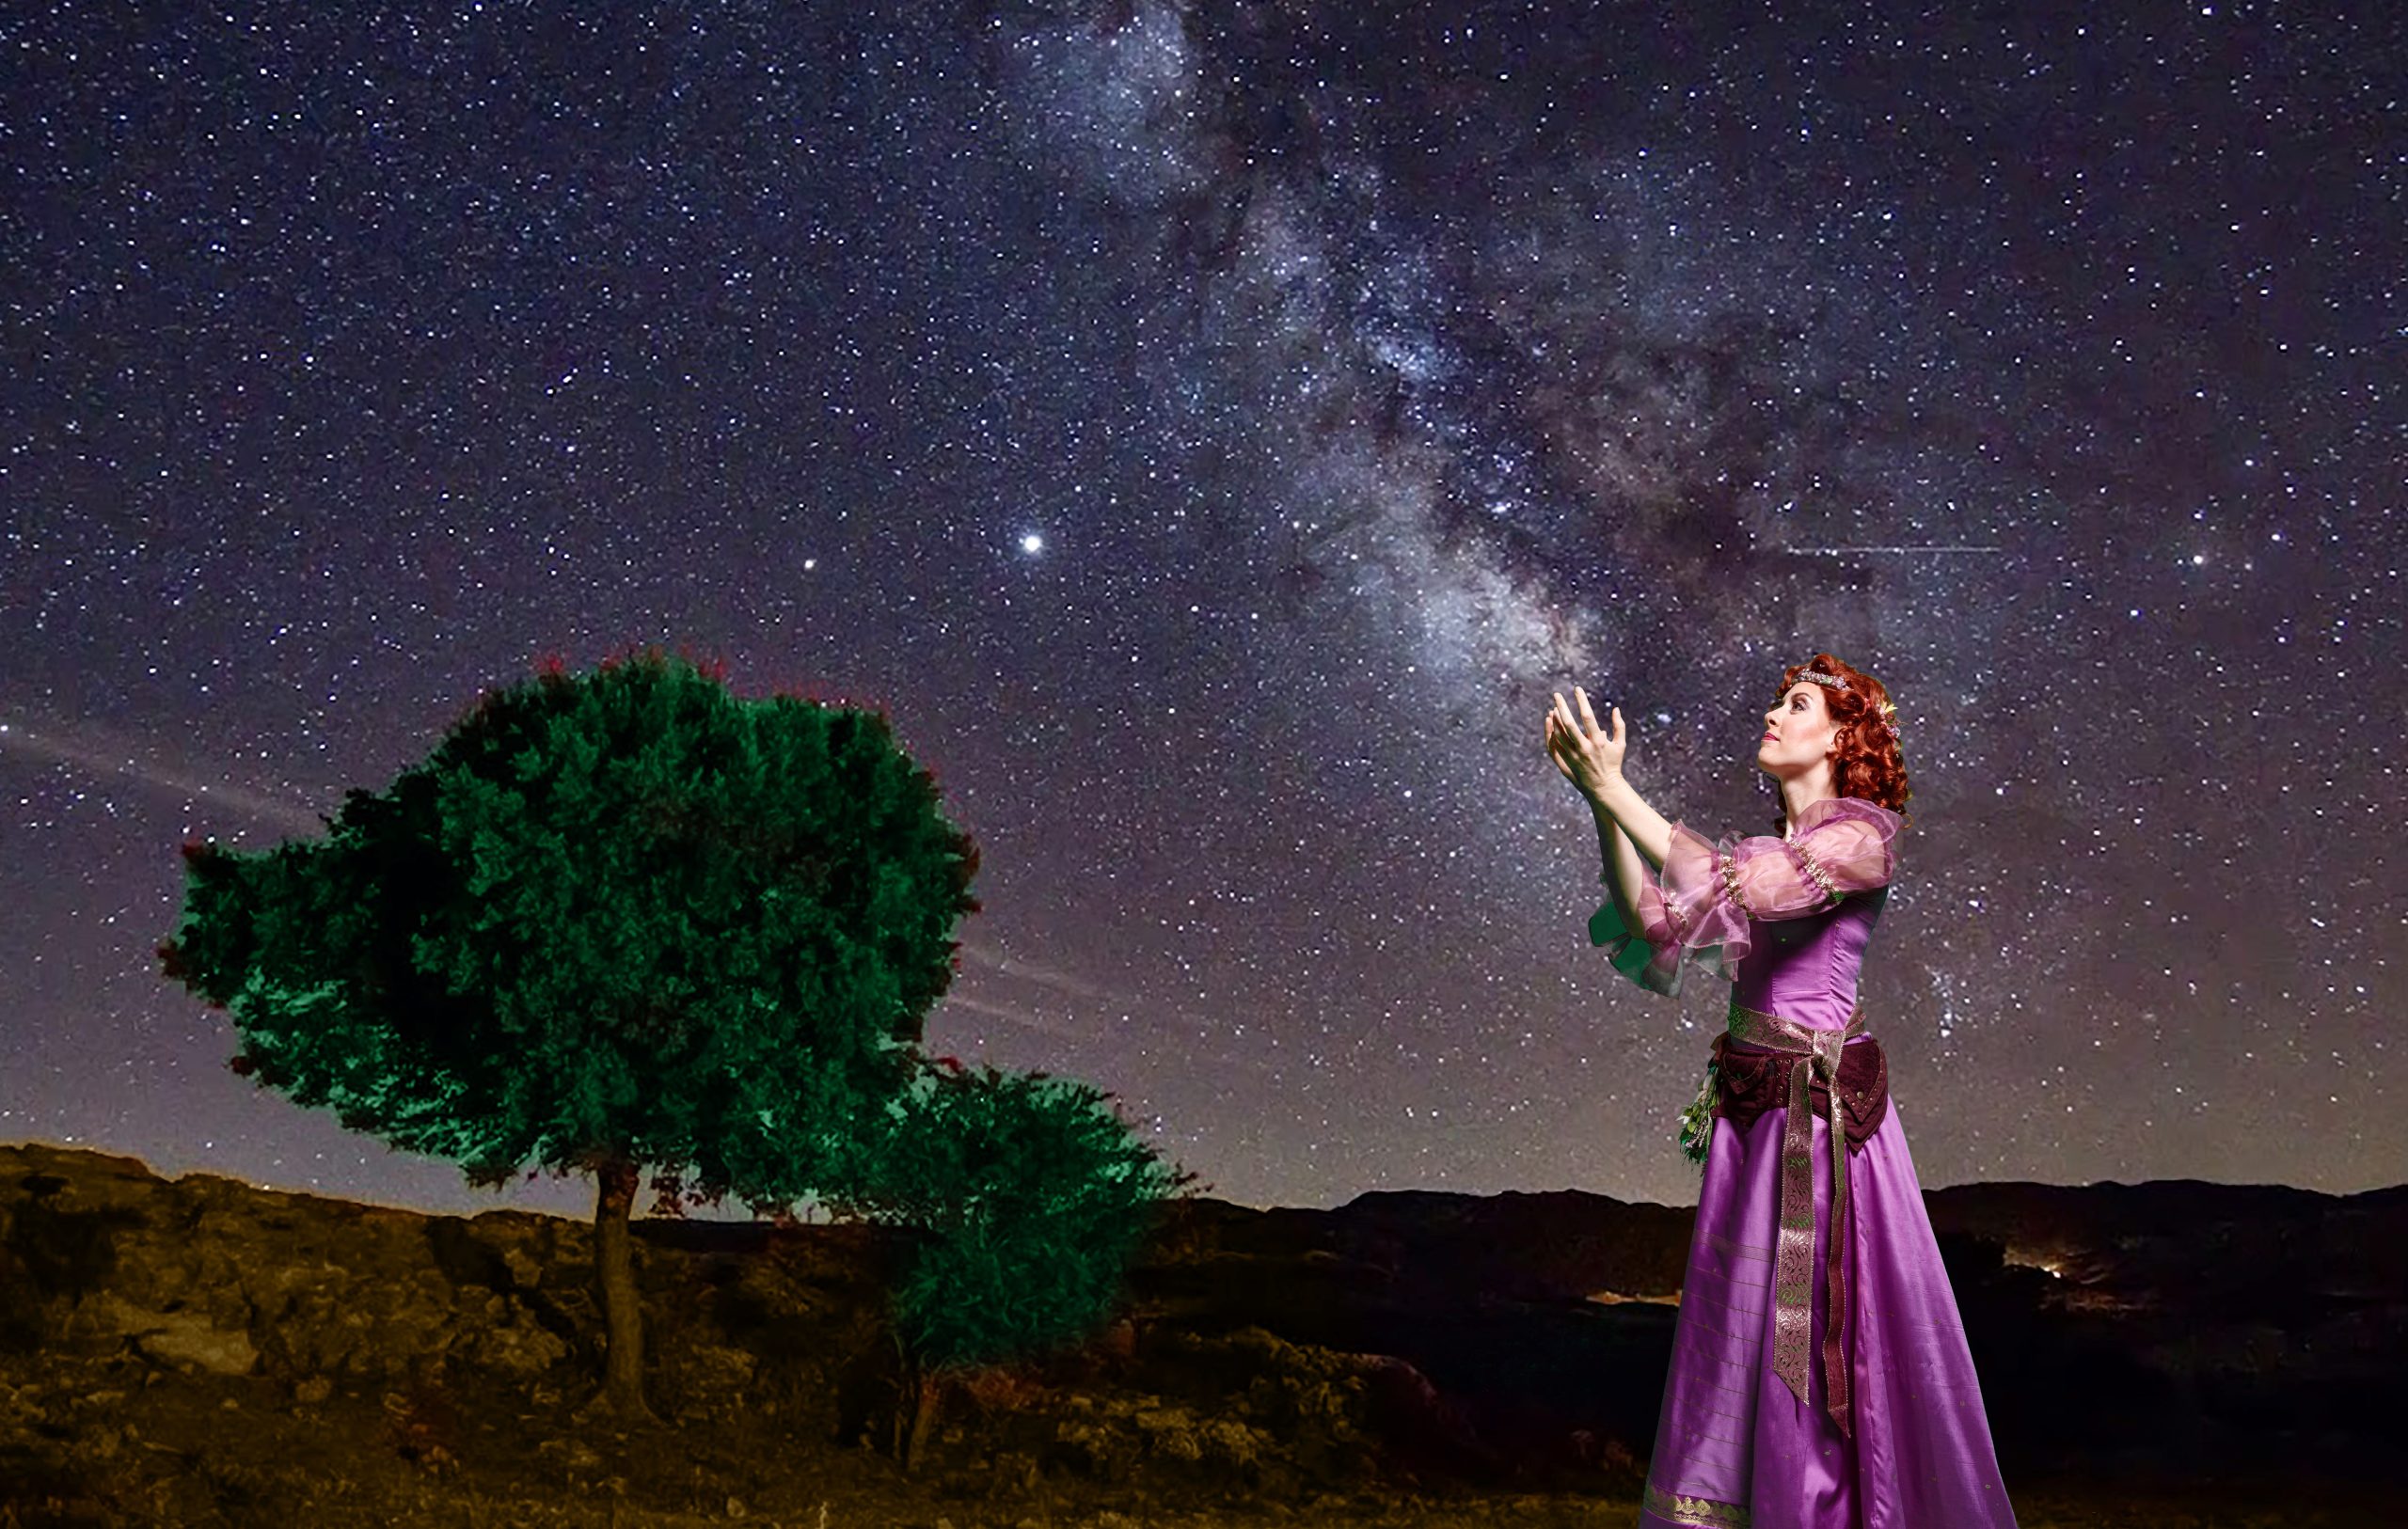 Wishing on a billion stars, Pamina, daughter of the Queen of the Night, longs for release from darkness in 'The Magic Flute.' Pittsburgh Opera has soprano Adelaide Boedecker in the role. (photo: David Bachman Photography)